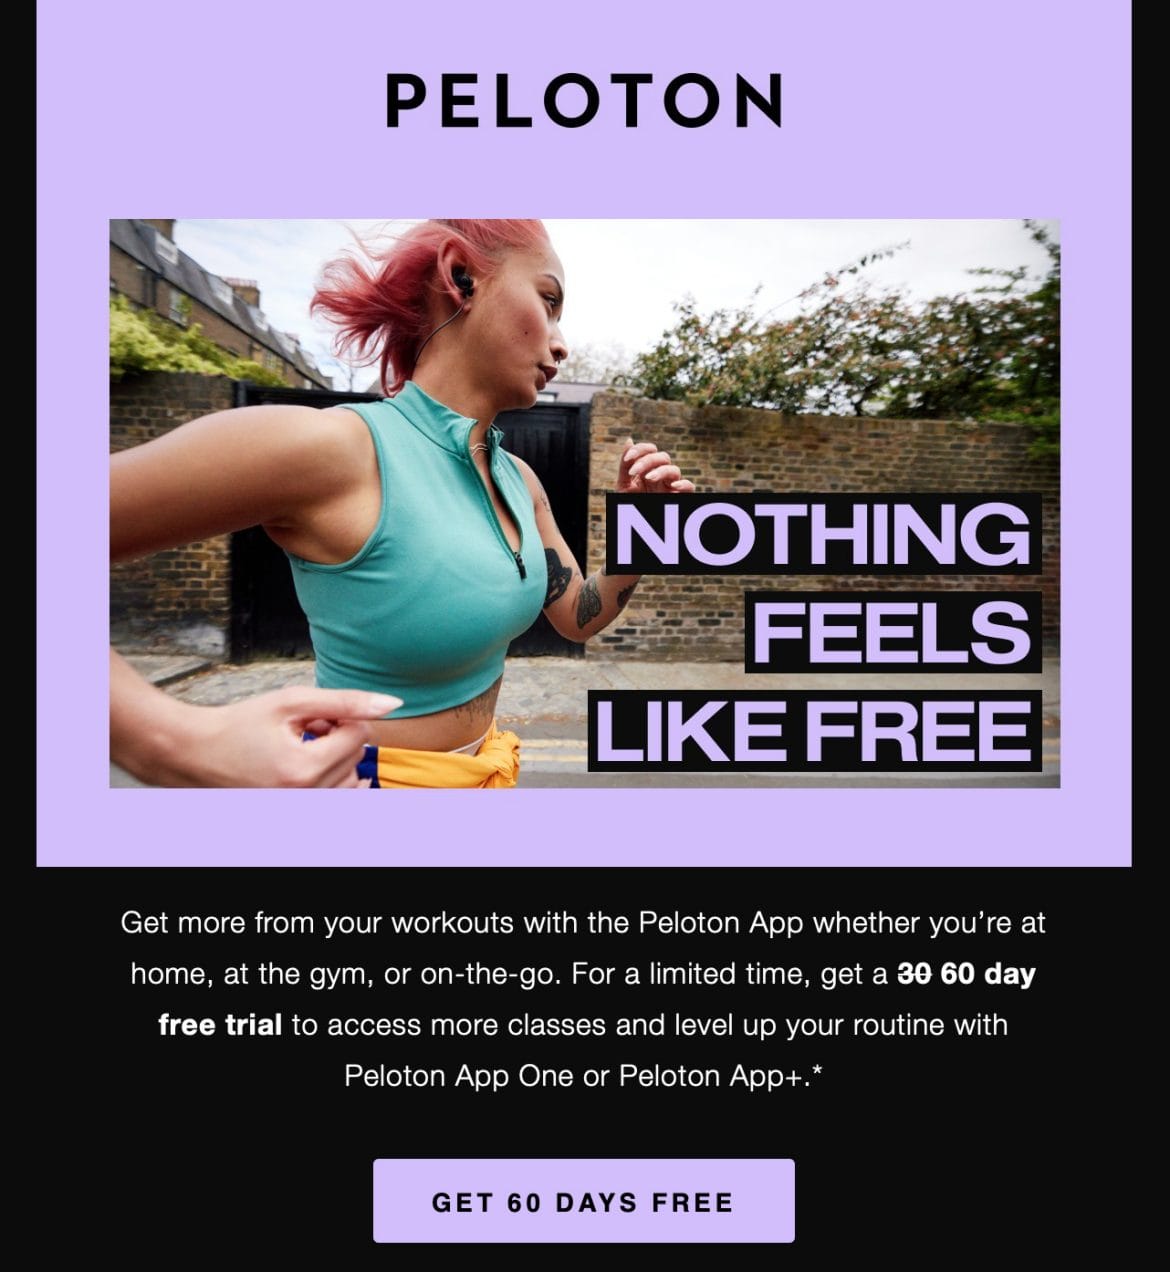 Peloton email advertising 60 day free app offer through October 31, 2023.